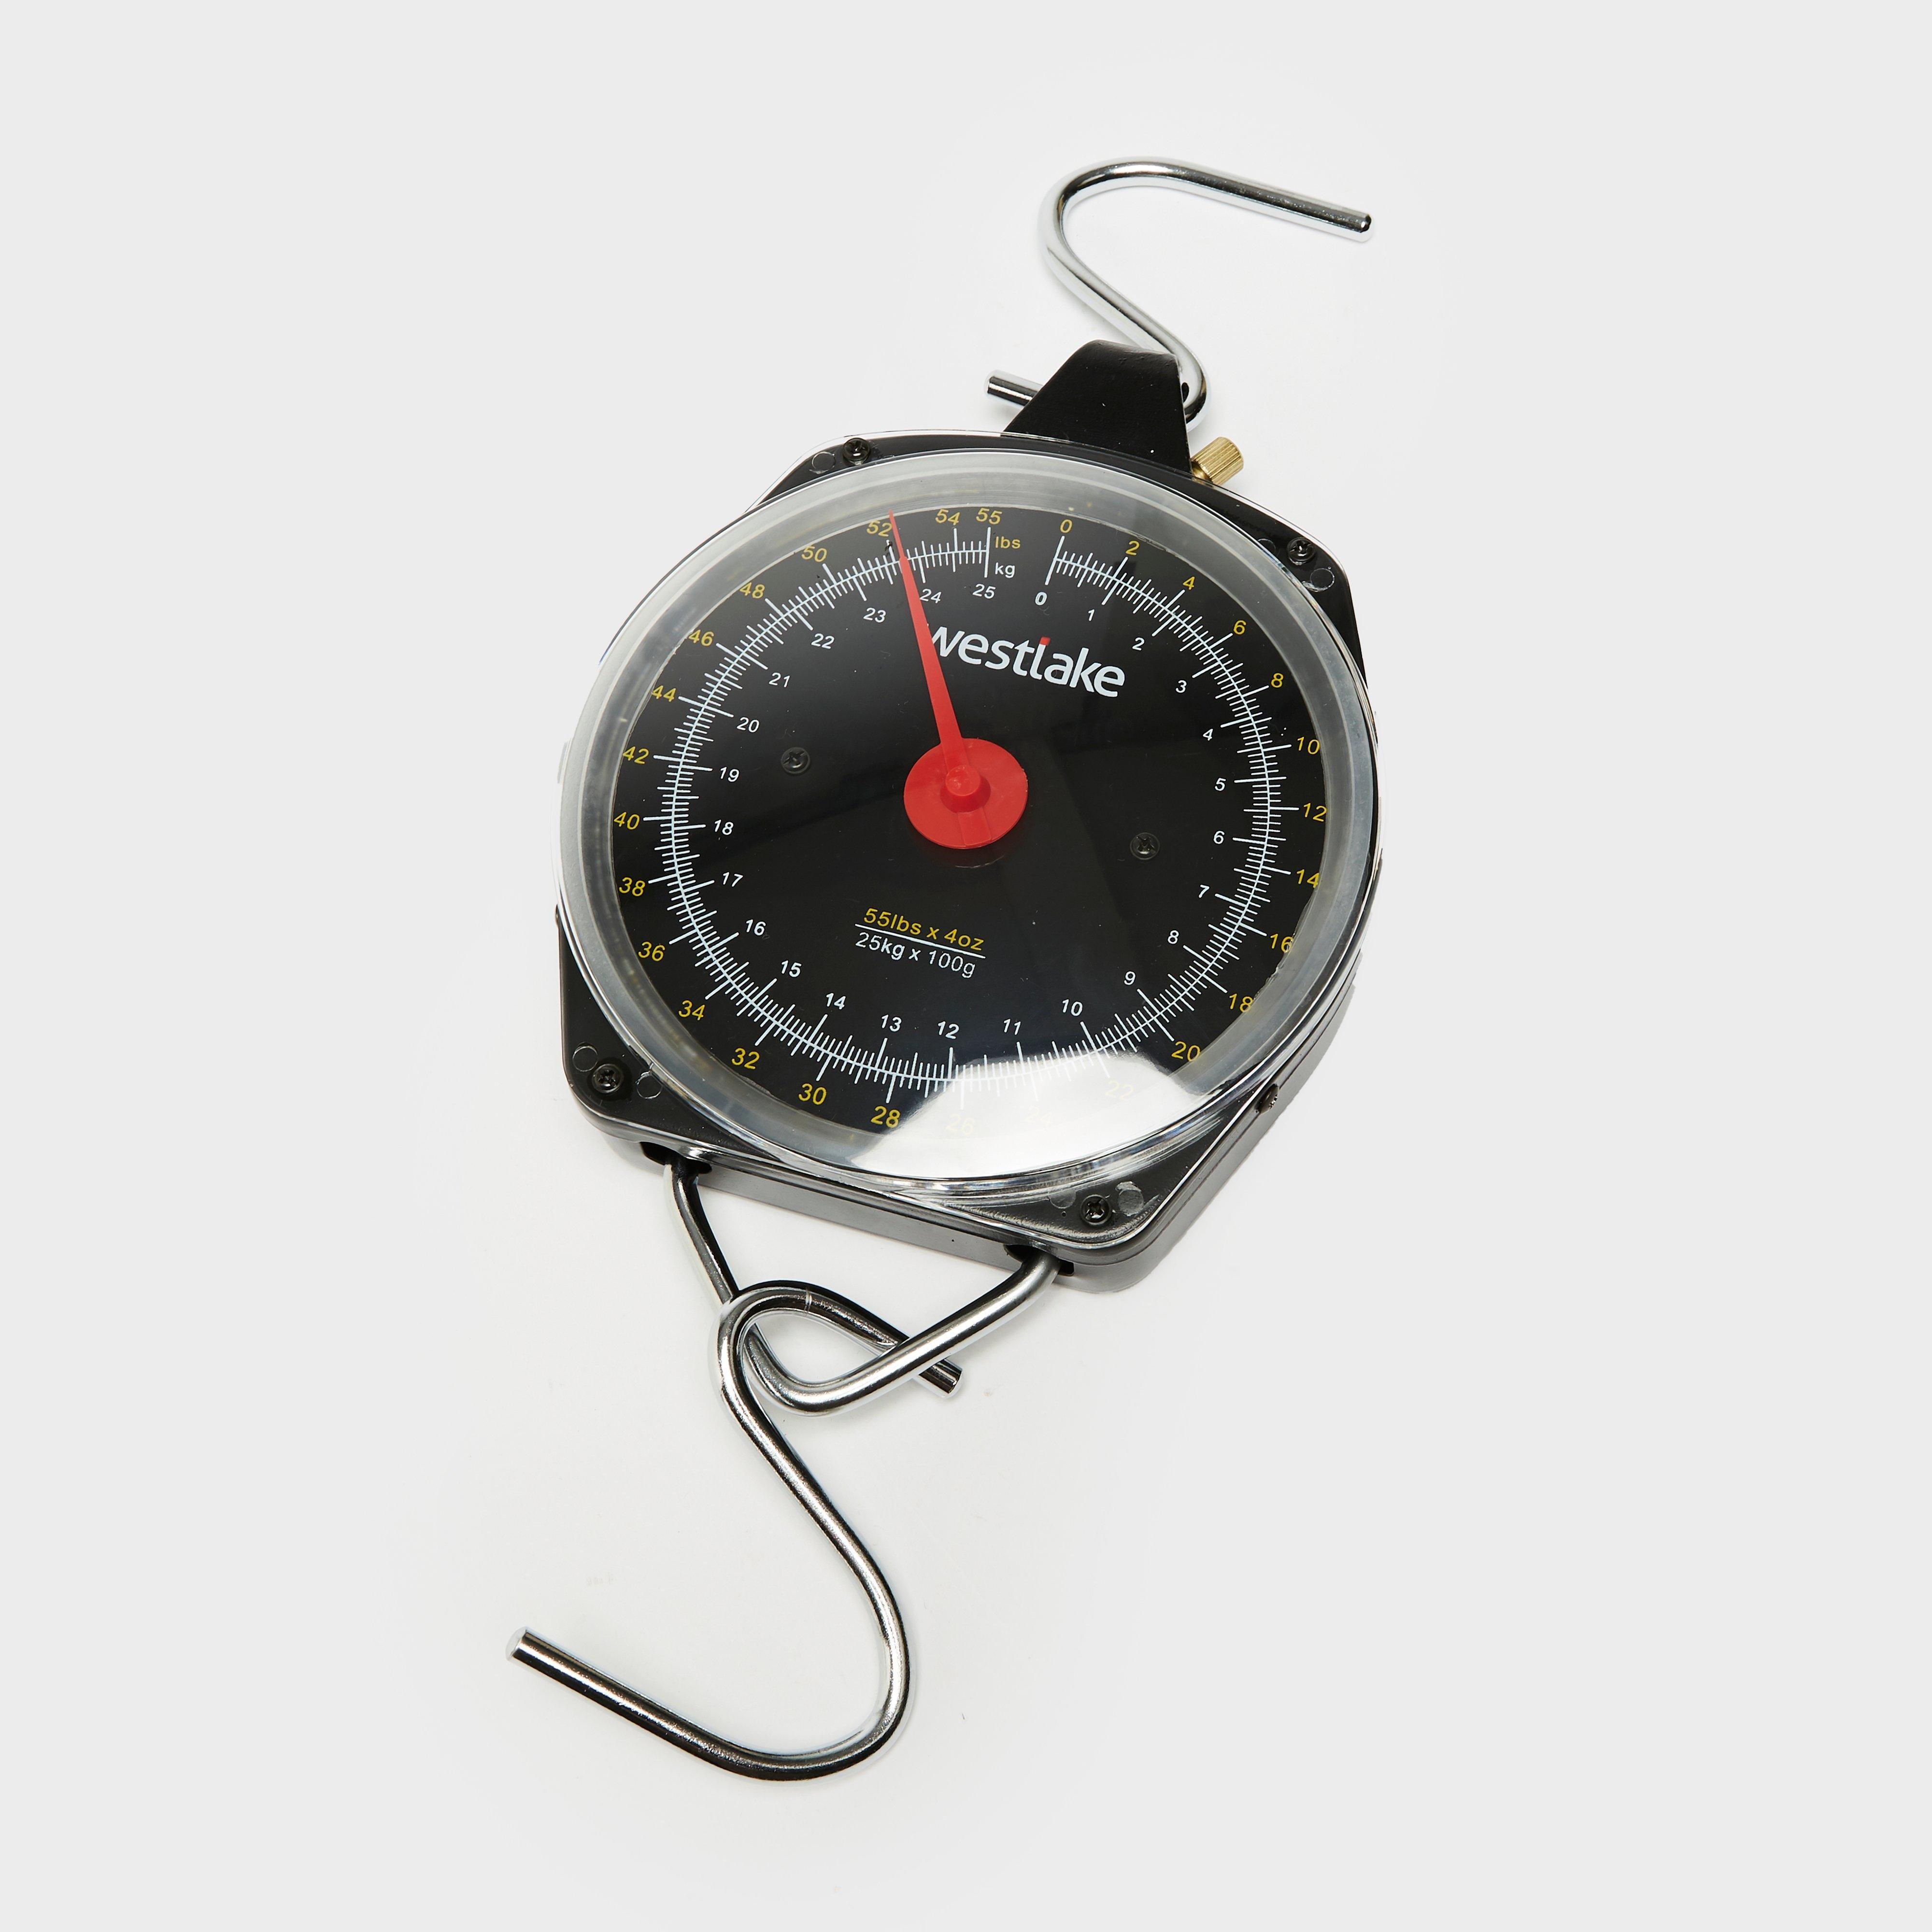 Photos - MP3 Player West Lake Westlake 55Lb Dial Scales, Multi Coloured 